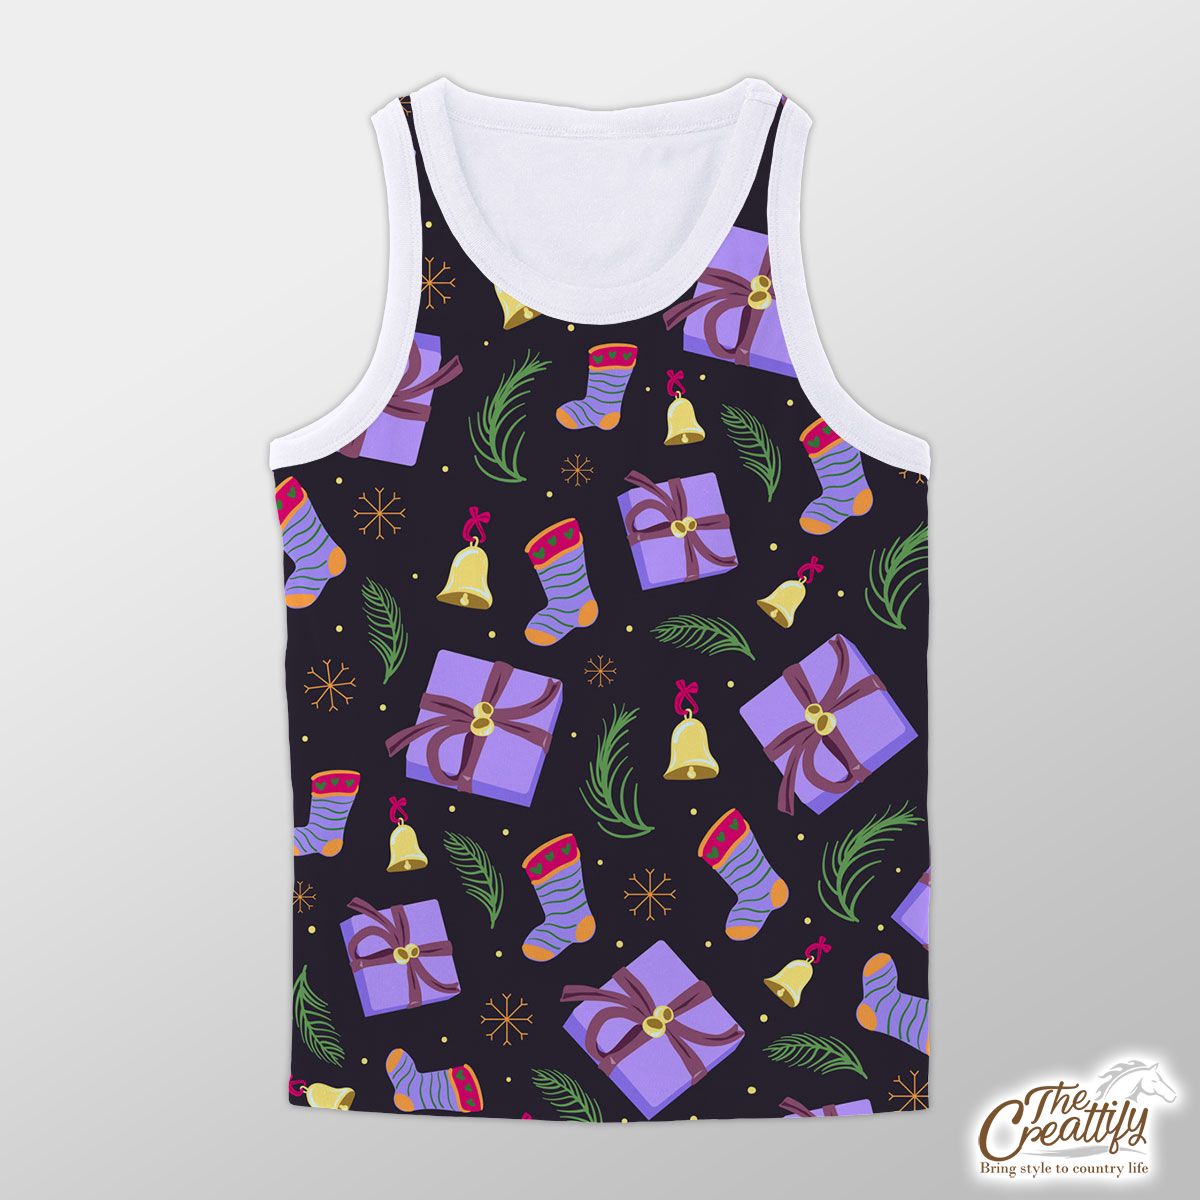 Purple Christmas Gifts And Socks With Bells On The Snowflake Dark Background Unisex Tank Top